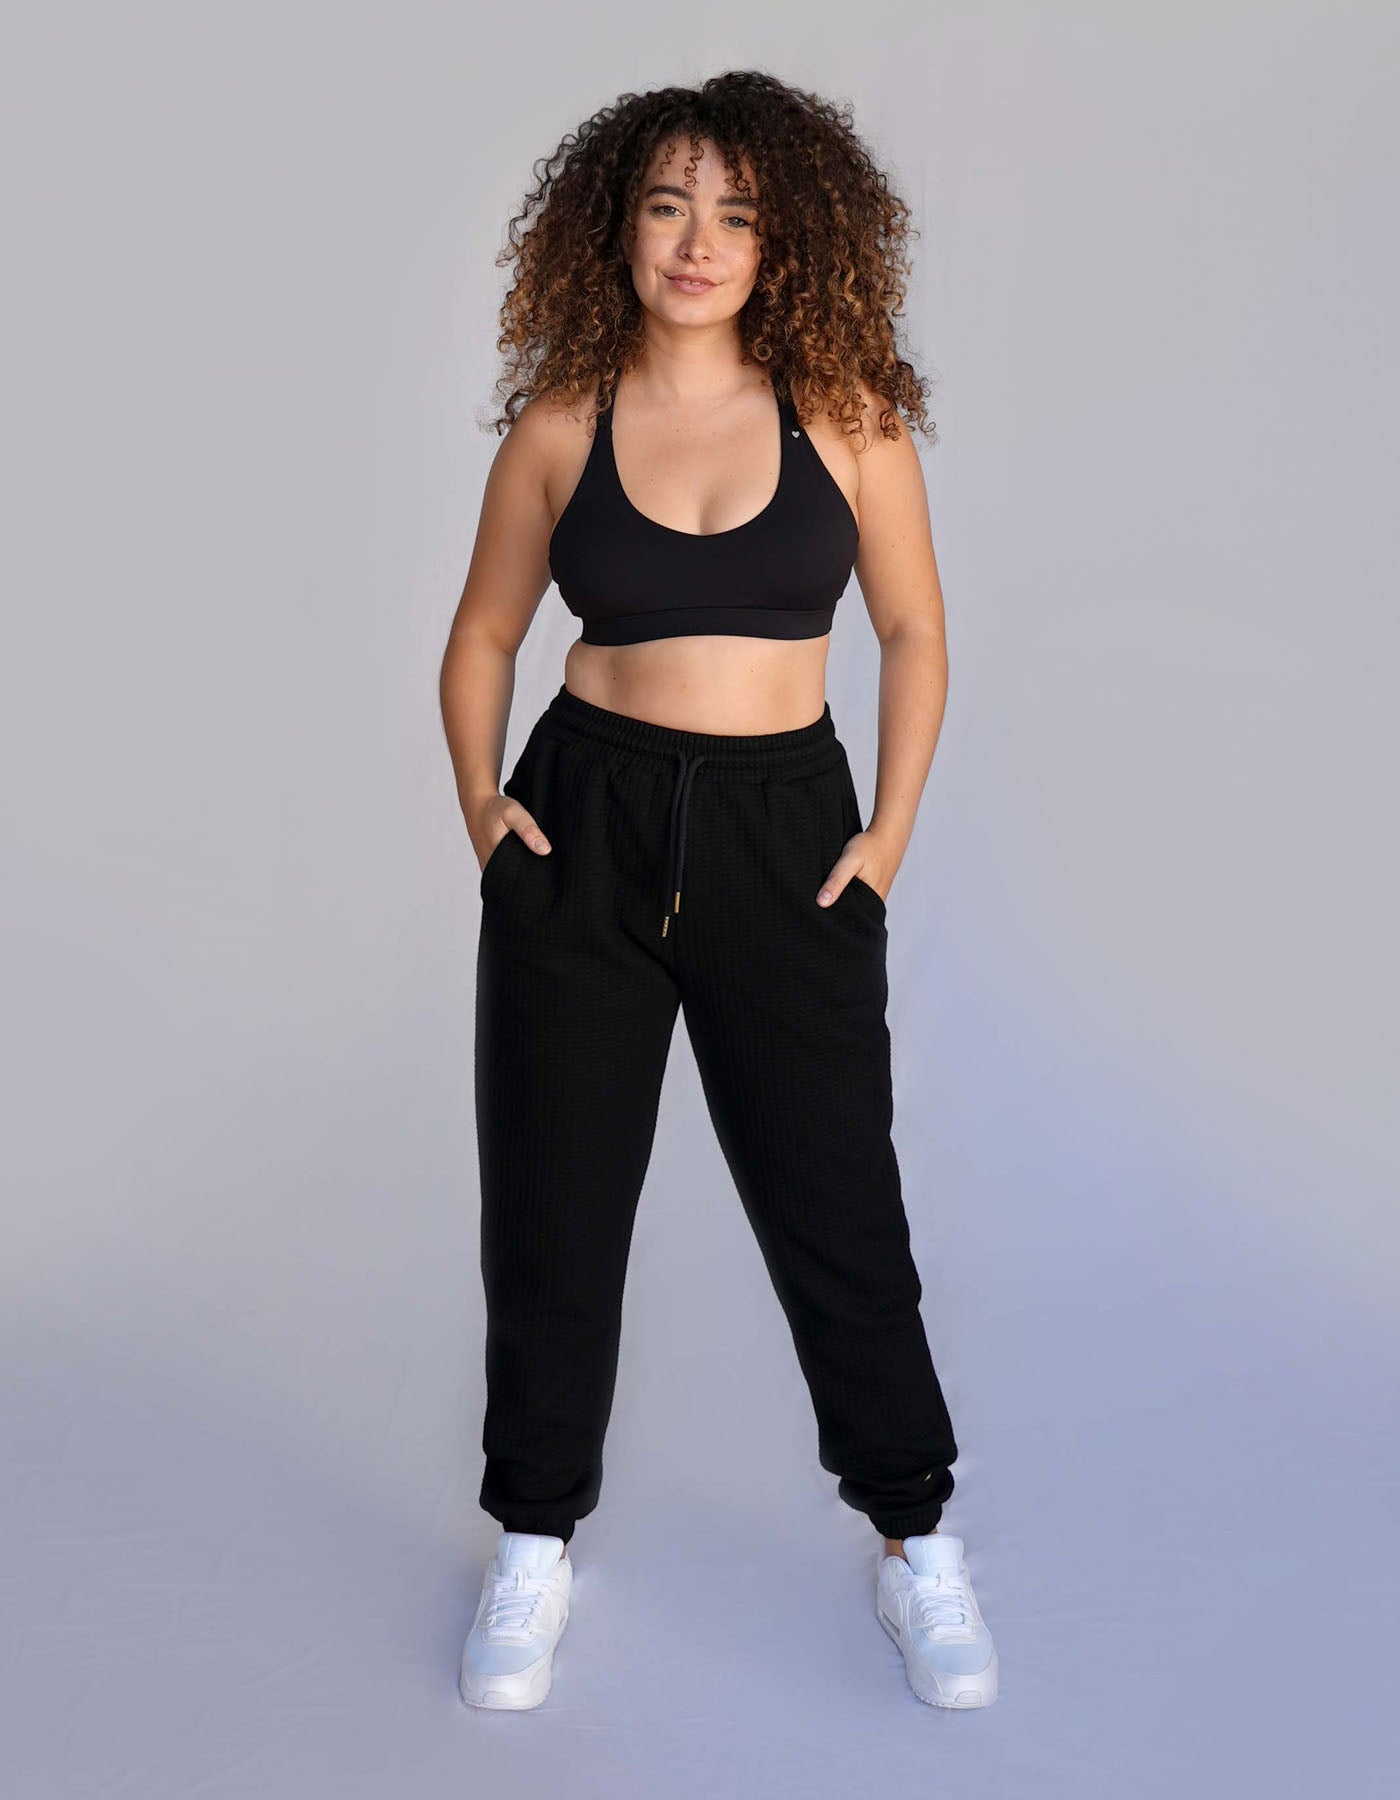 Crimson tavernorlando Phaedra Joggers in the color black. Waffle texture with pockets and drawstring to adjust the waistband.